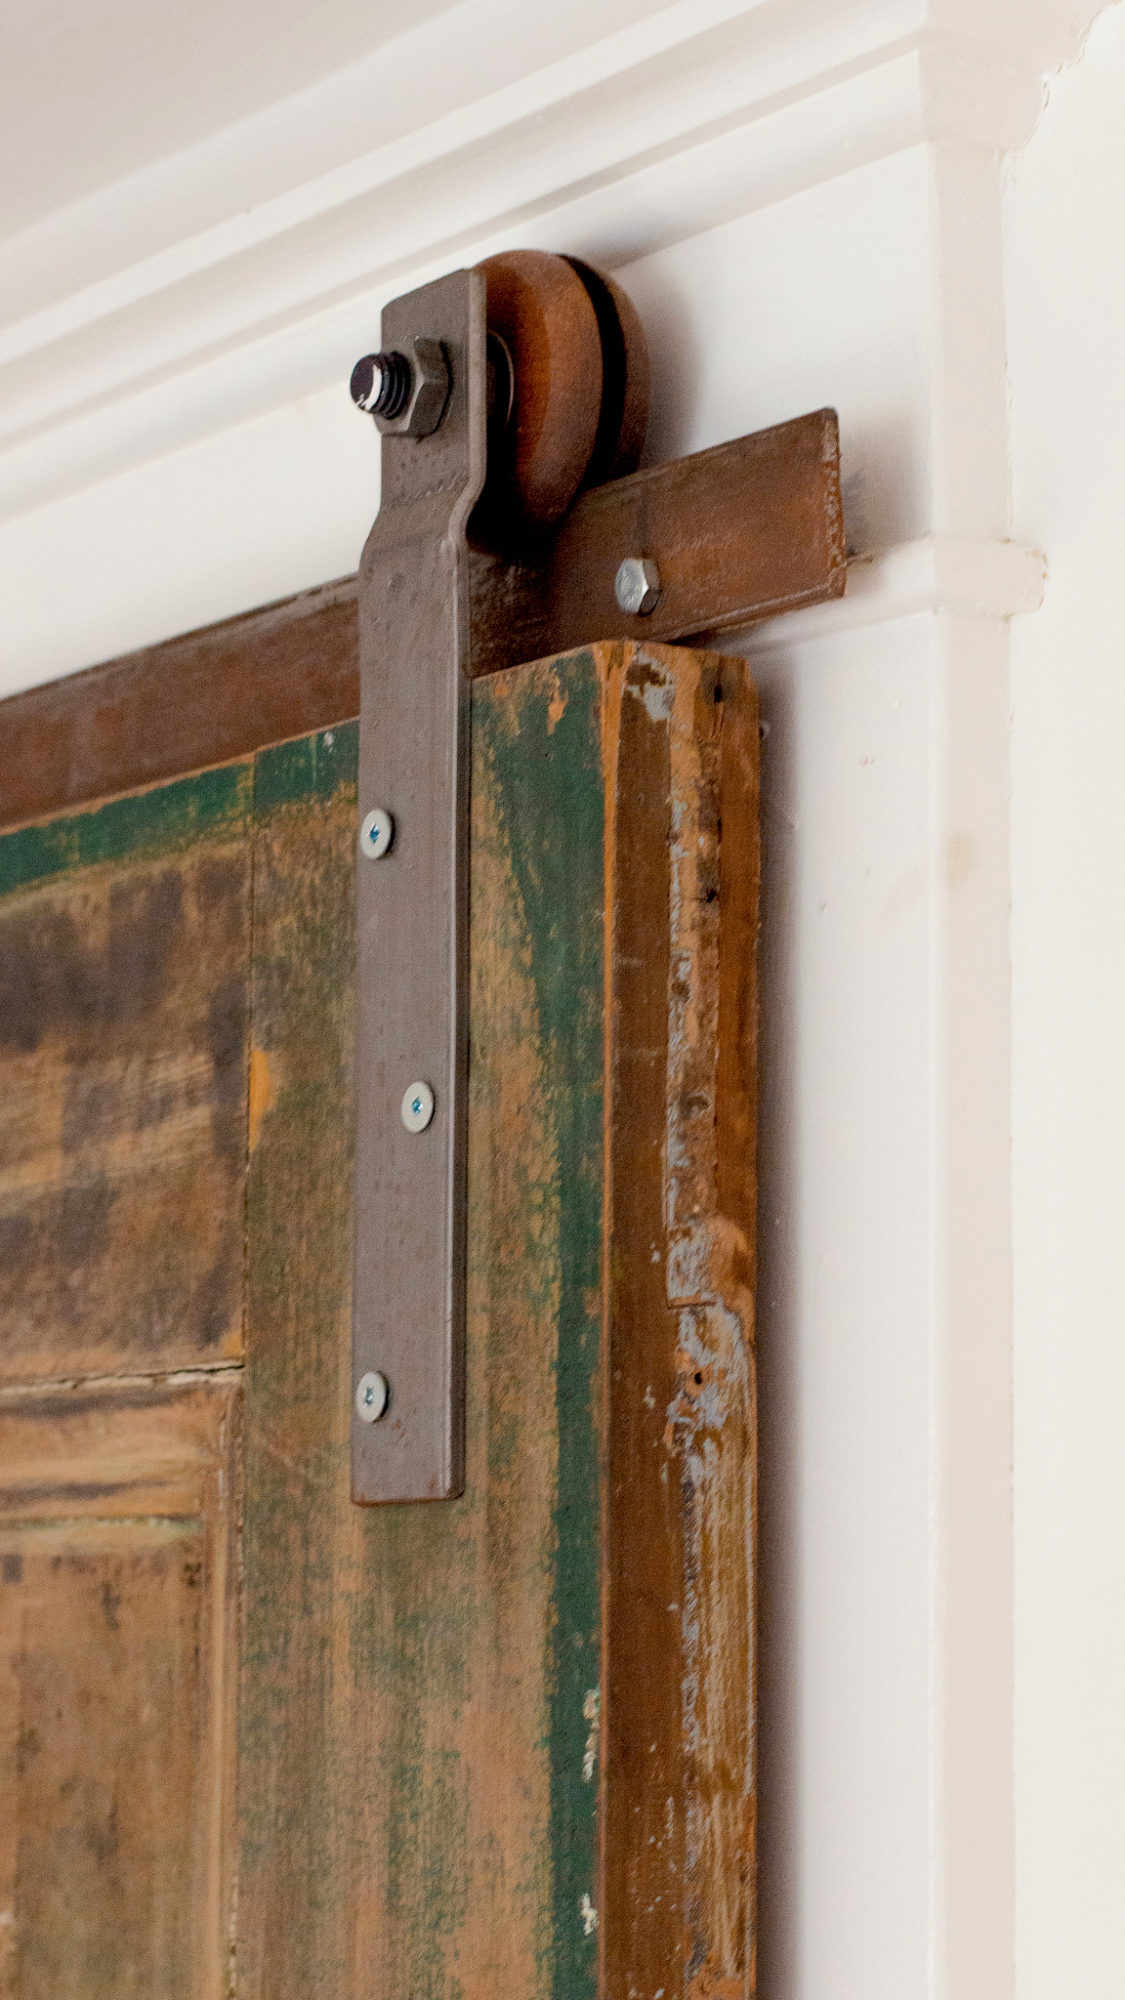 DIY door track hardware : Create your own door track hardware using old vintage doors. We’ll show you how. Save tons of money and have gorgeous art-like doors for your home. 